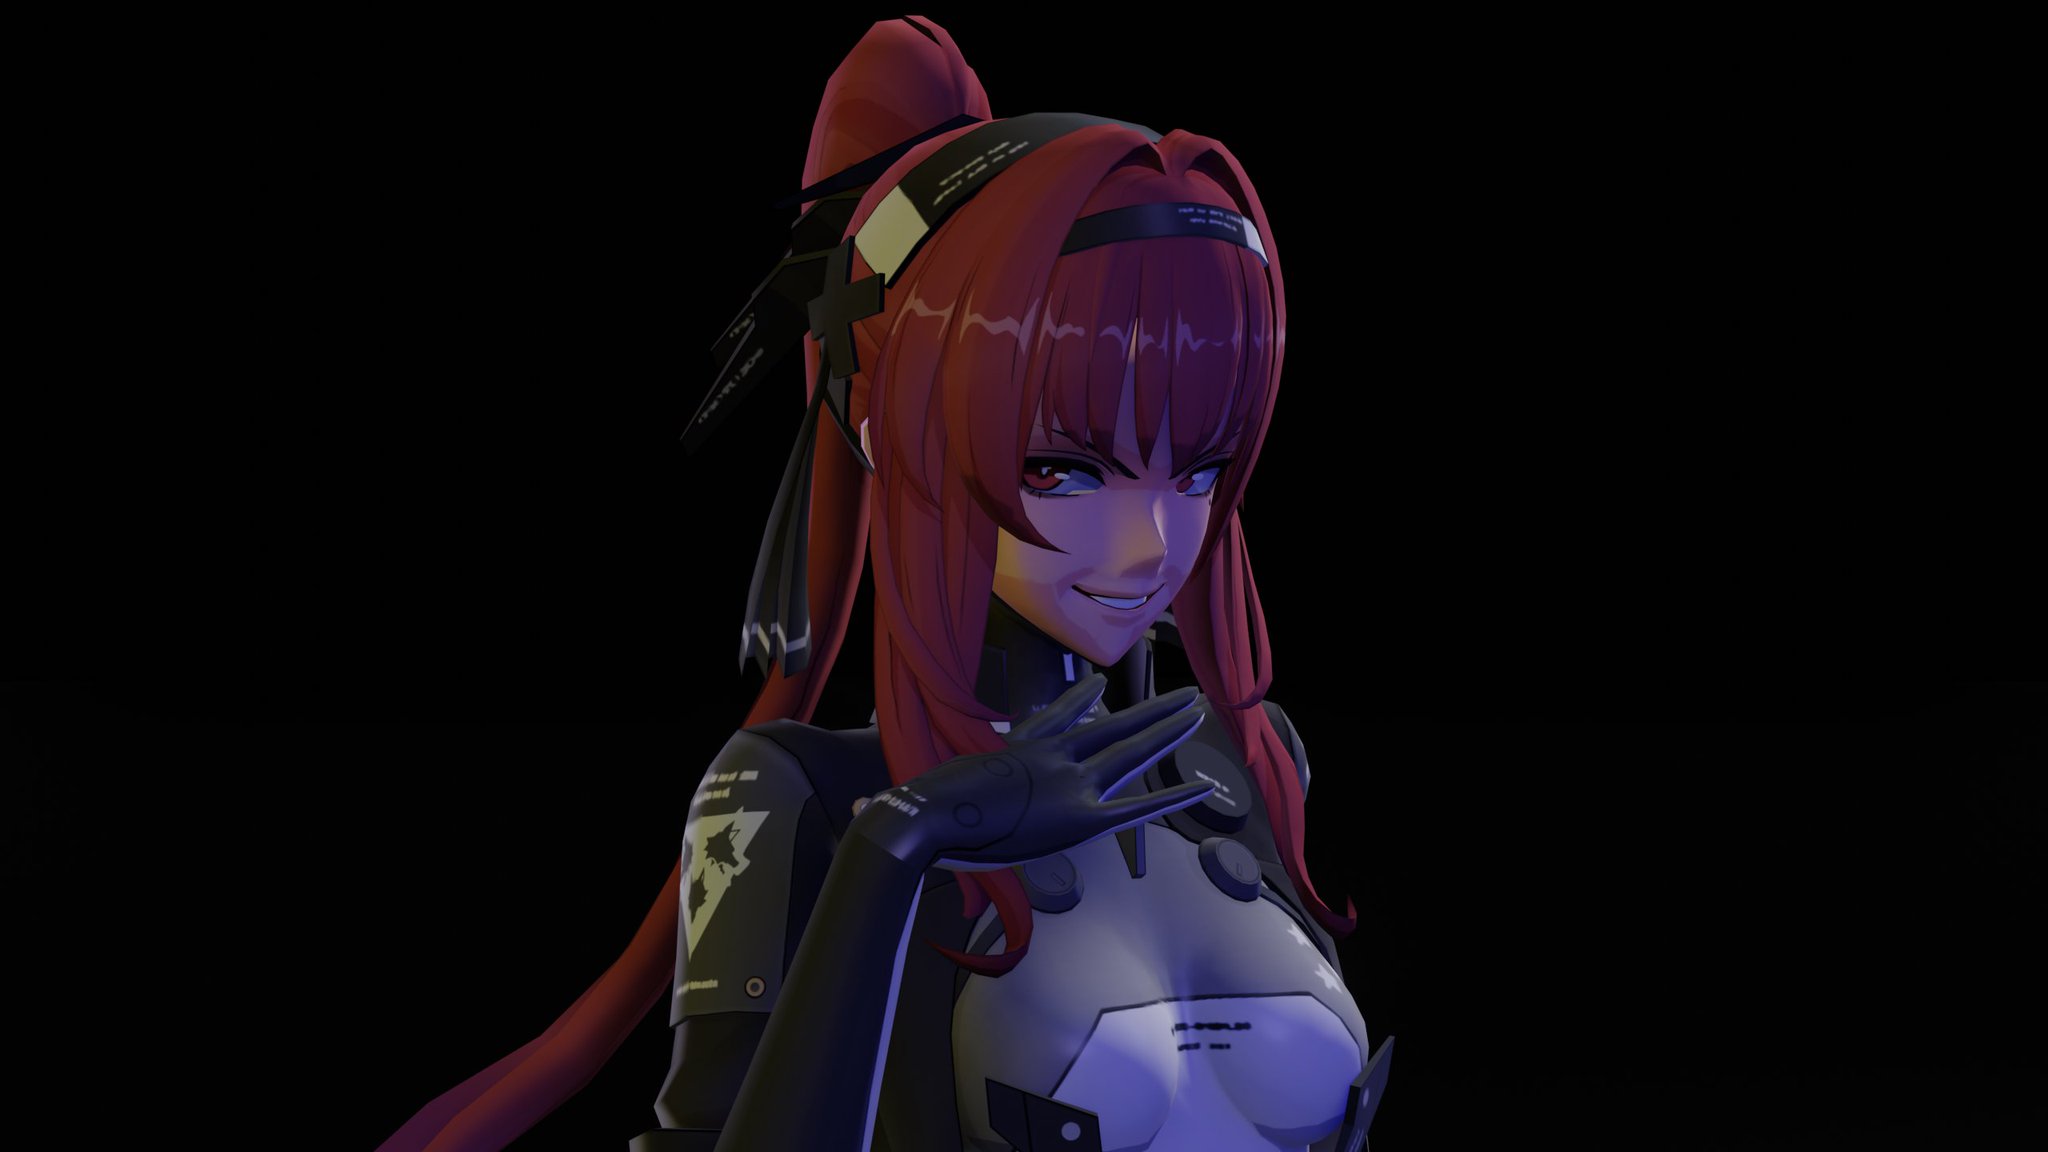 Code Vein - Zero Two Character Creation (Darling in the Franxx) 